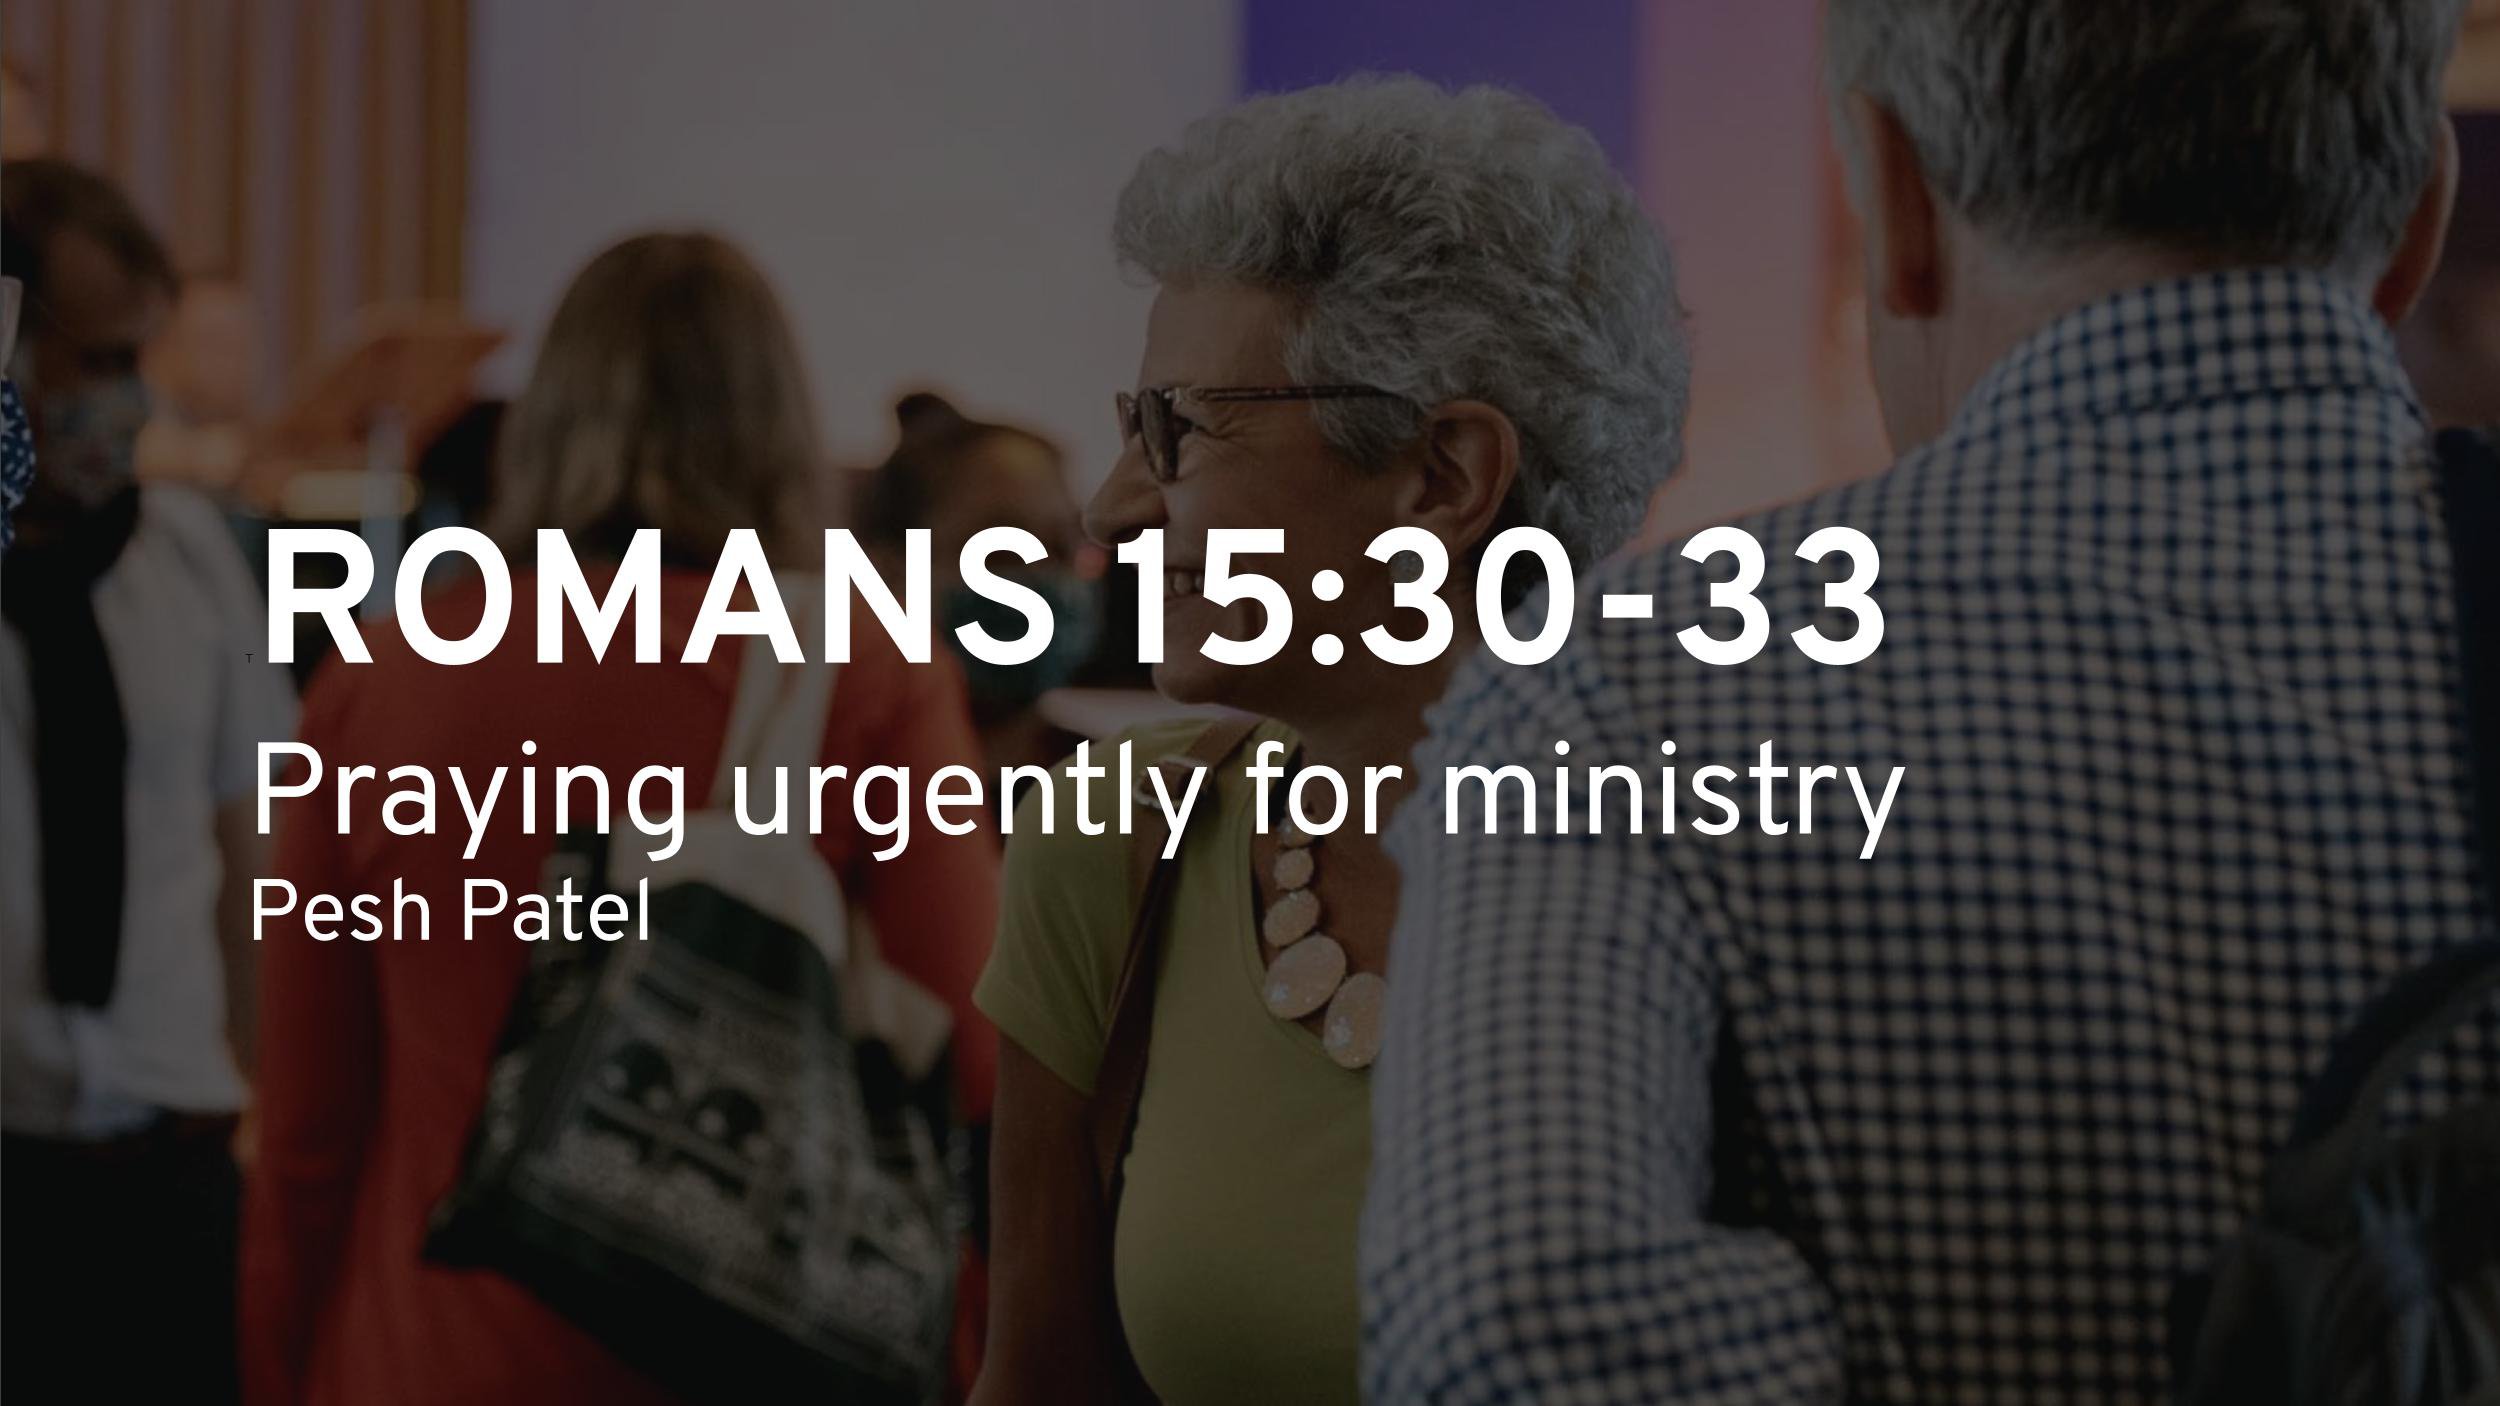 Praying urgently for ministry